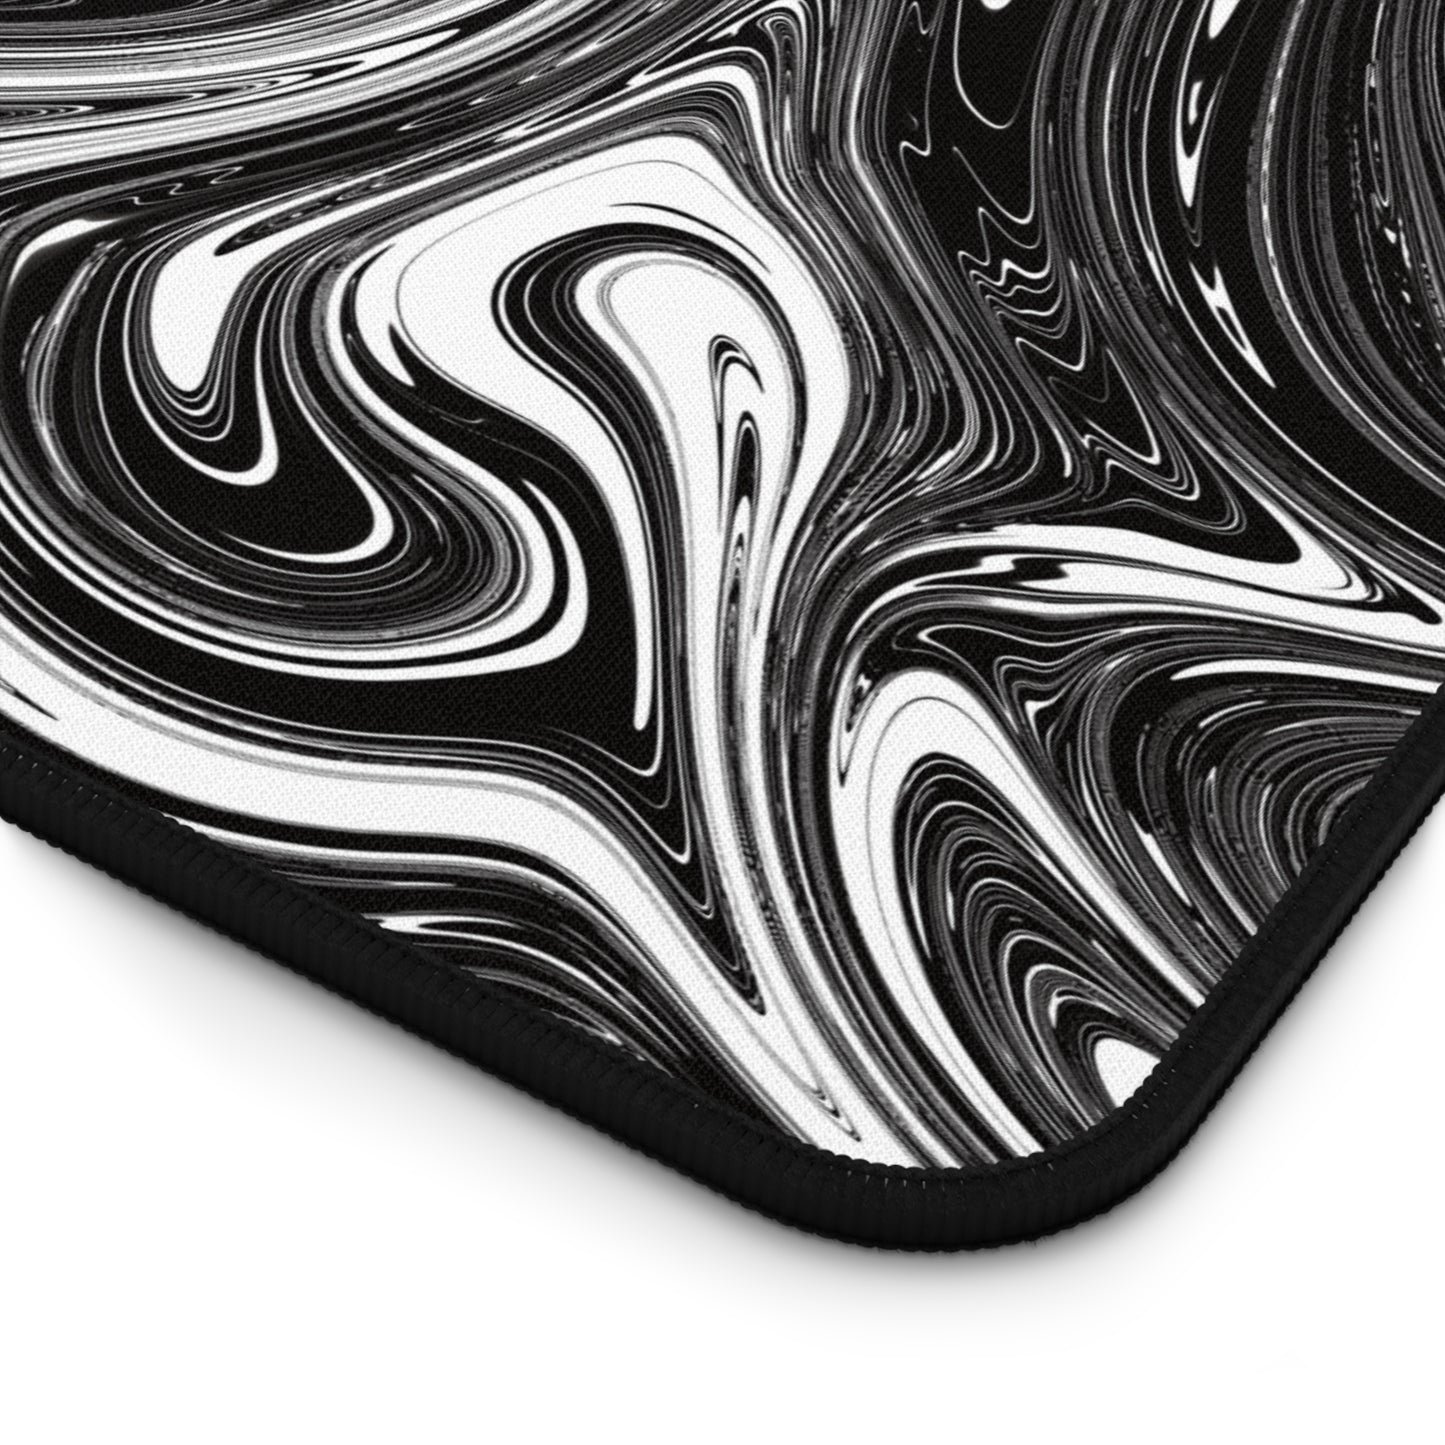 The corner of a 12" x 18" desk mat with black and white swirls.